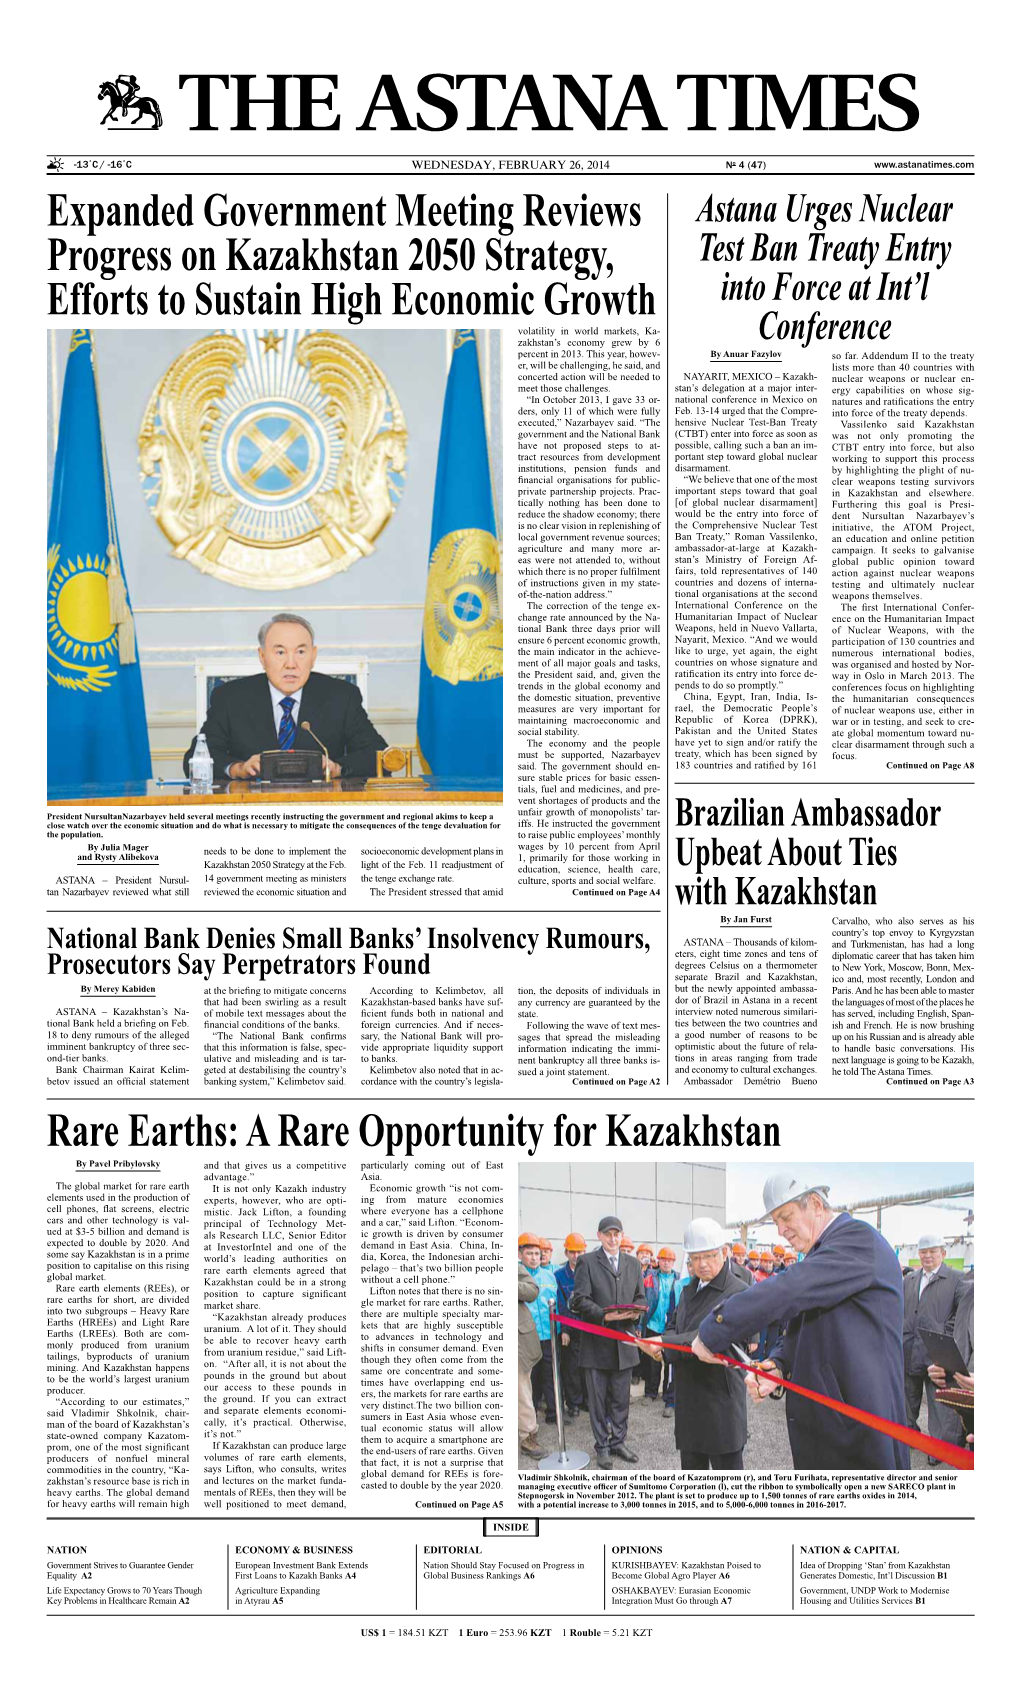 Rare Earths: a Rare Opportunity for Kazakhstan by Pavel Pribylovsky and That Gives Us a Competitive Particularly Coming out of East Advantage.” Asia